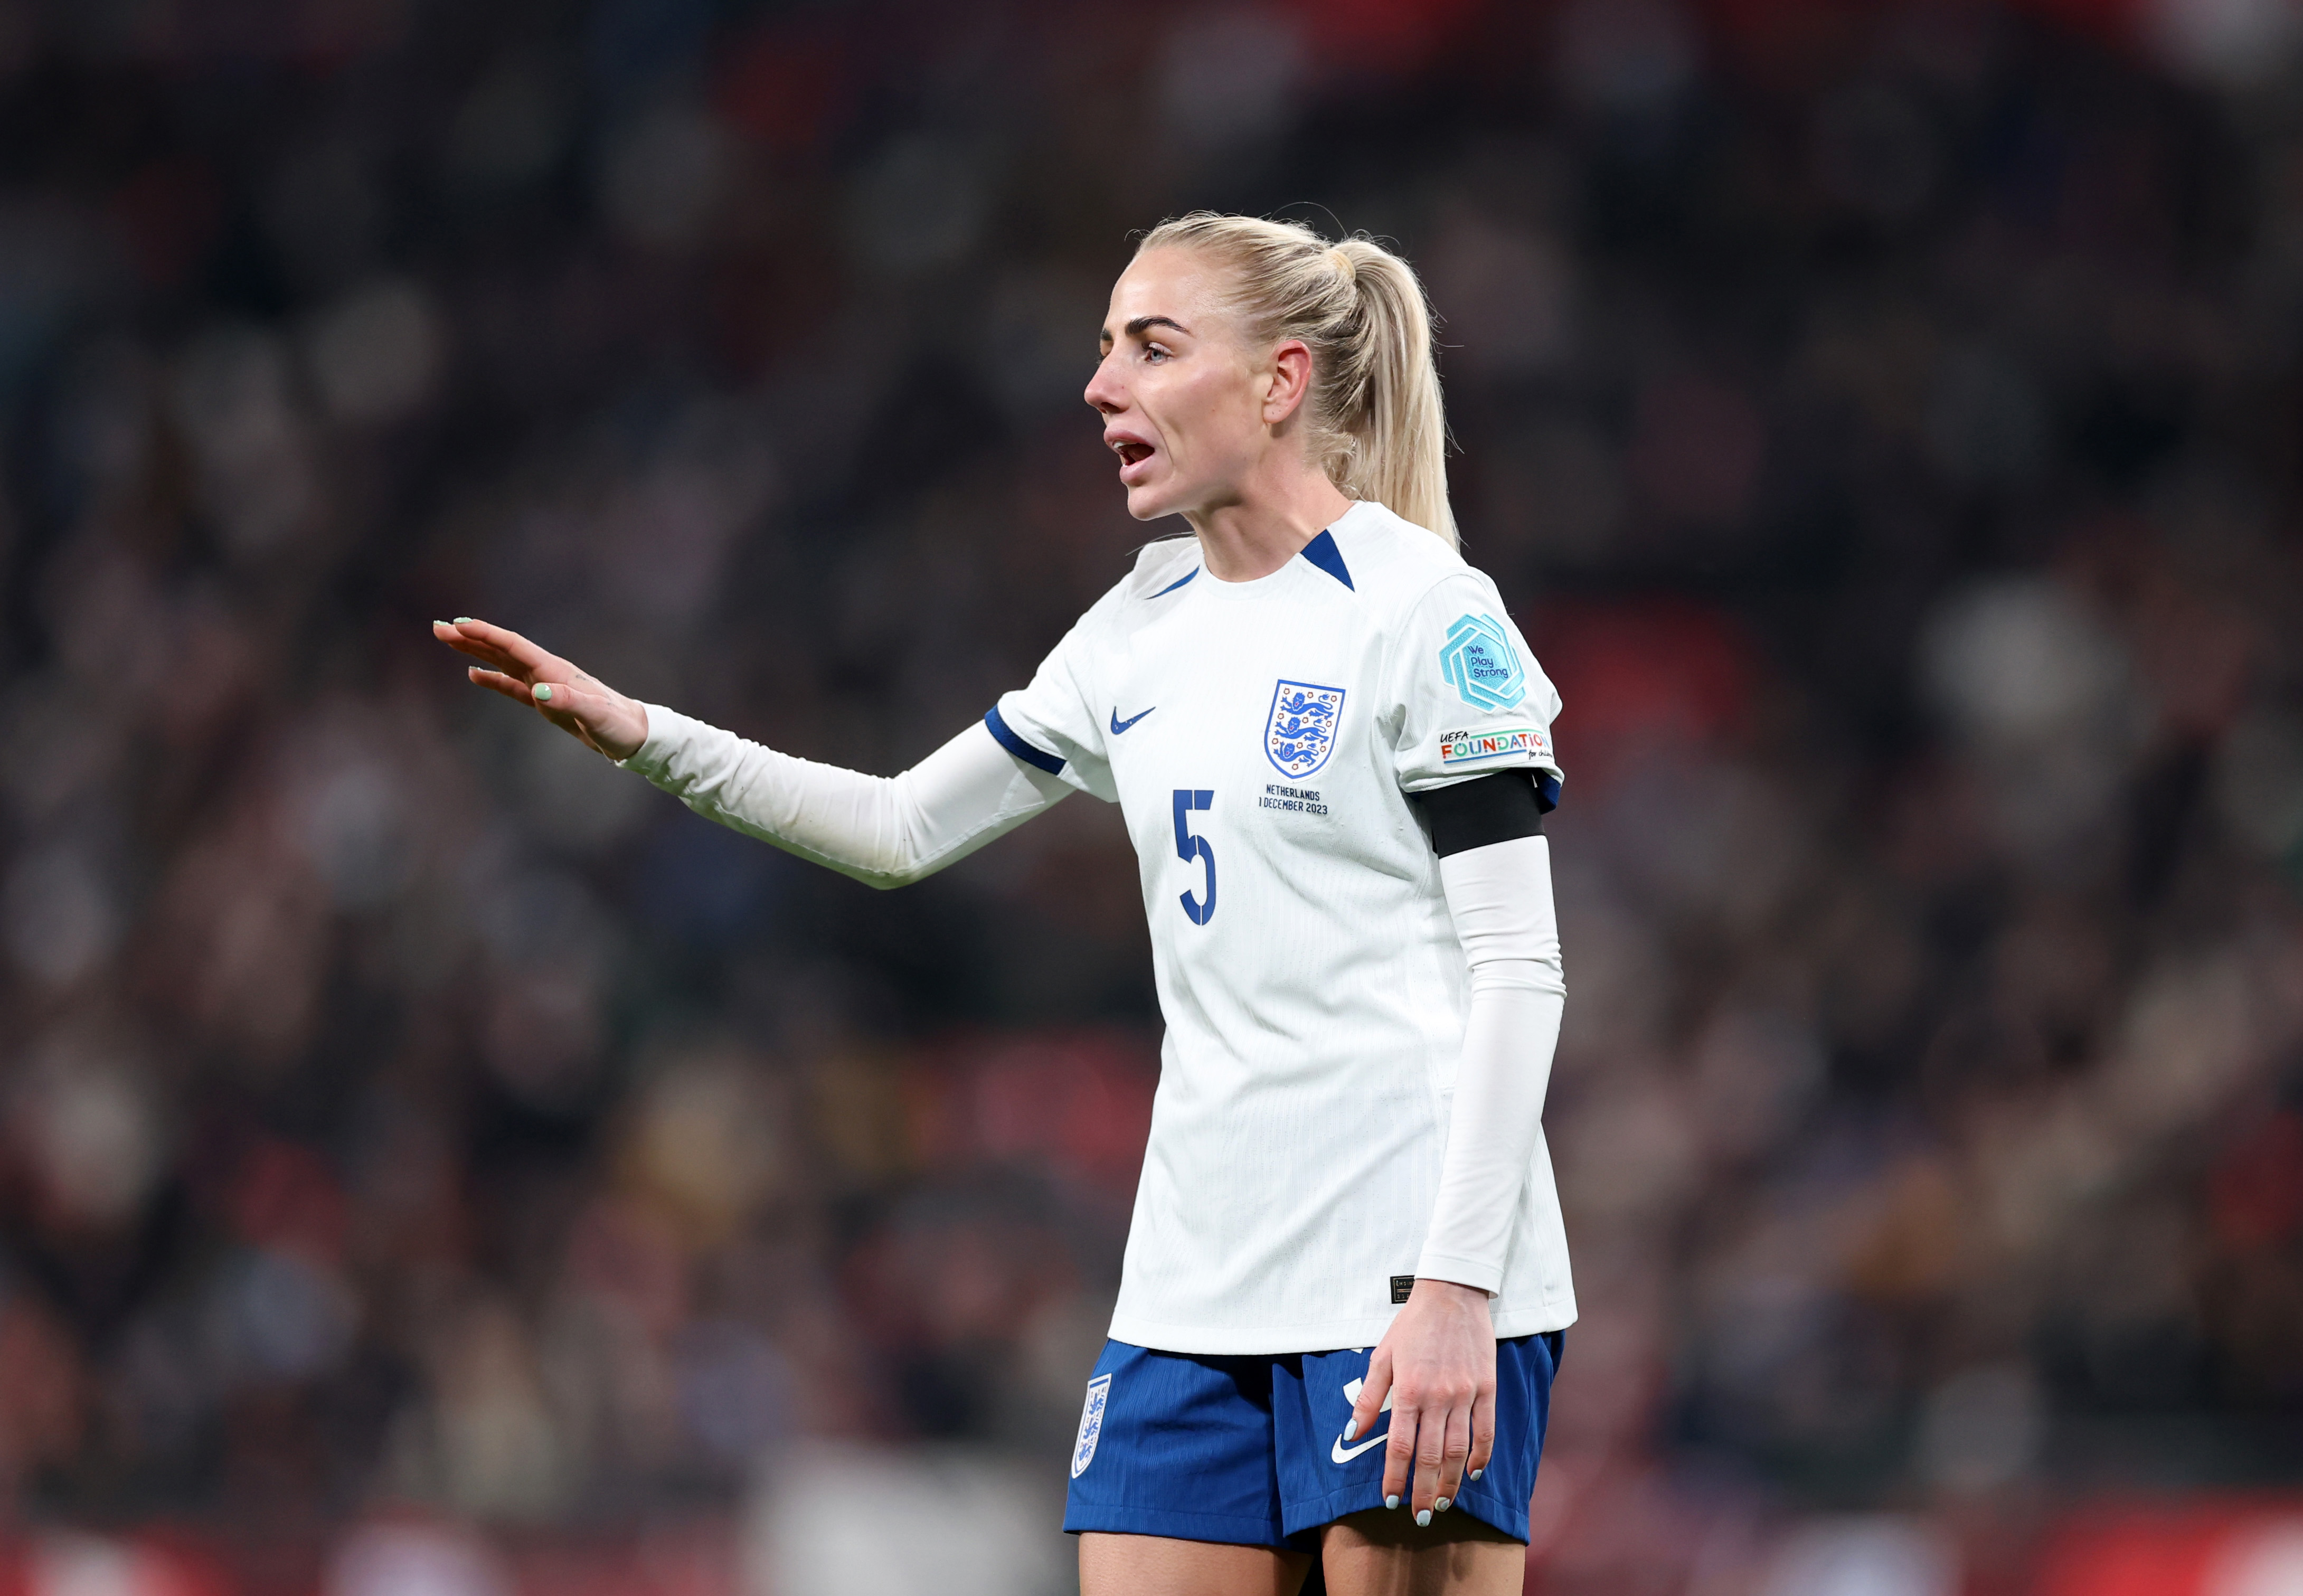 Dependable Alex Greenwood is believed to be worth around £1.2m